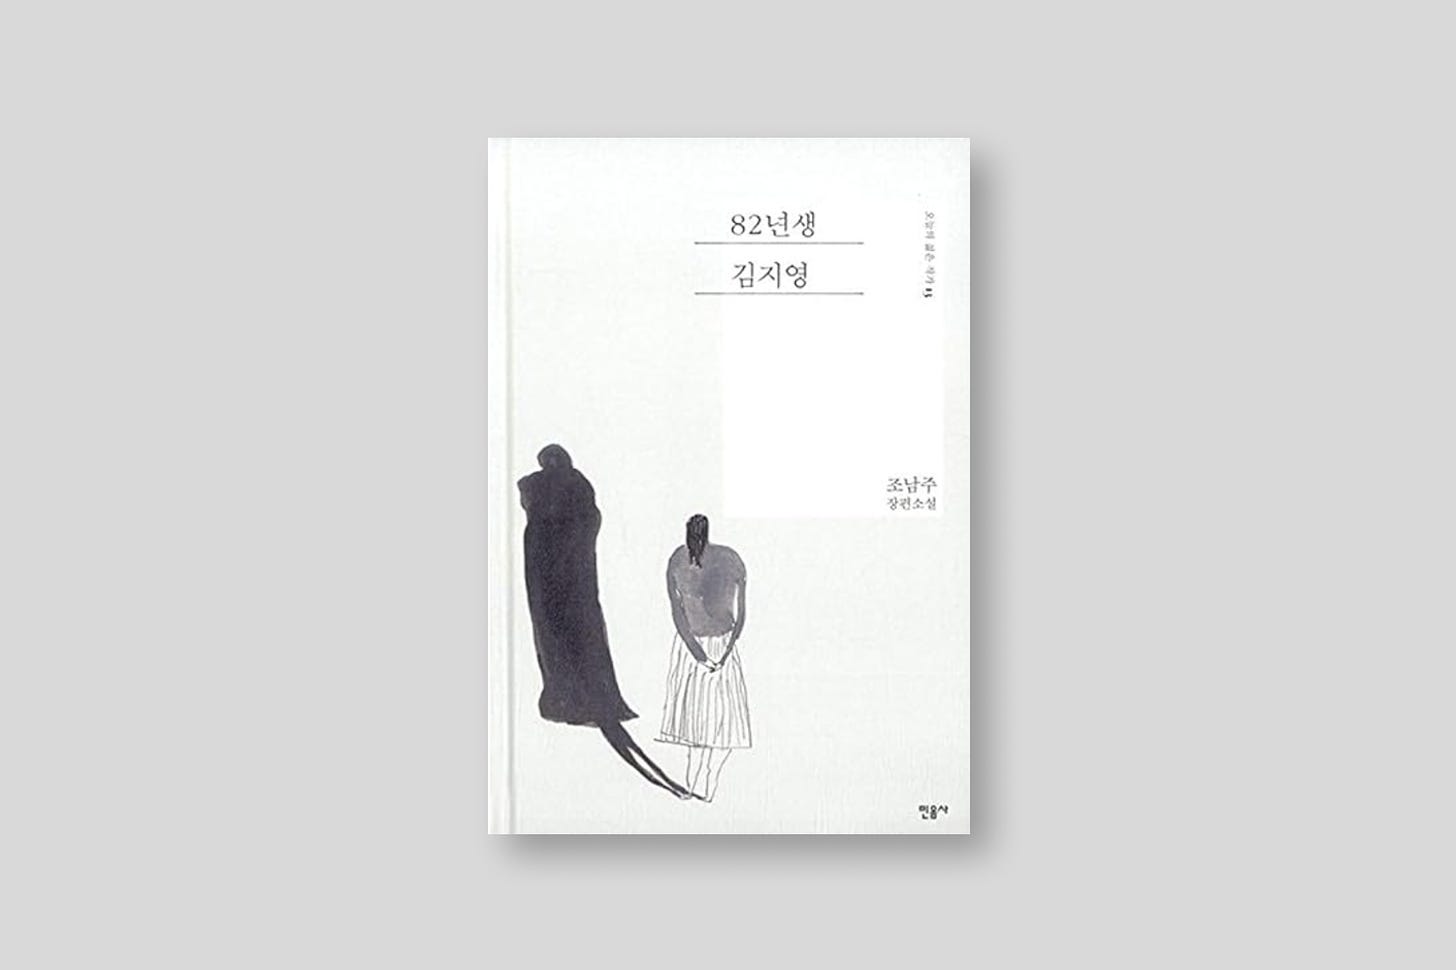 First edition book cover design of Kim Jiyoung Born 1982